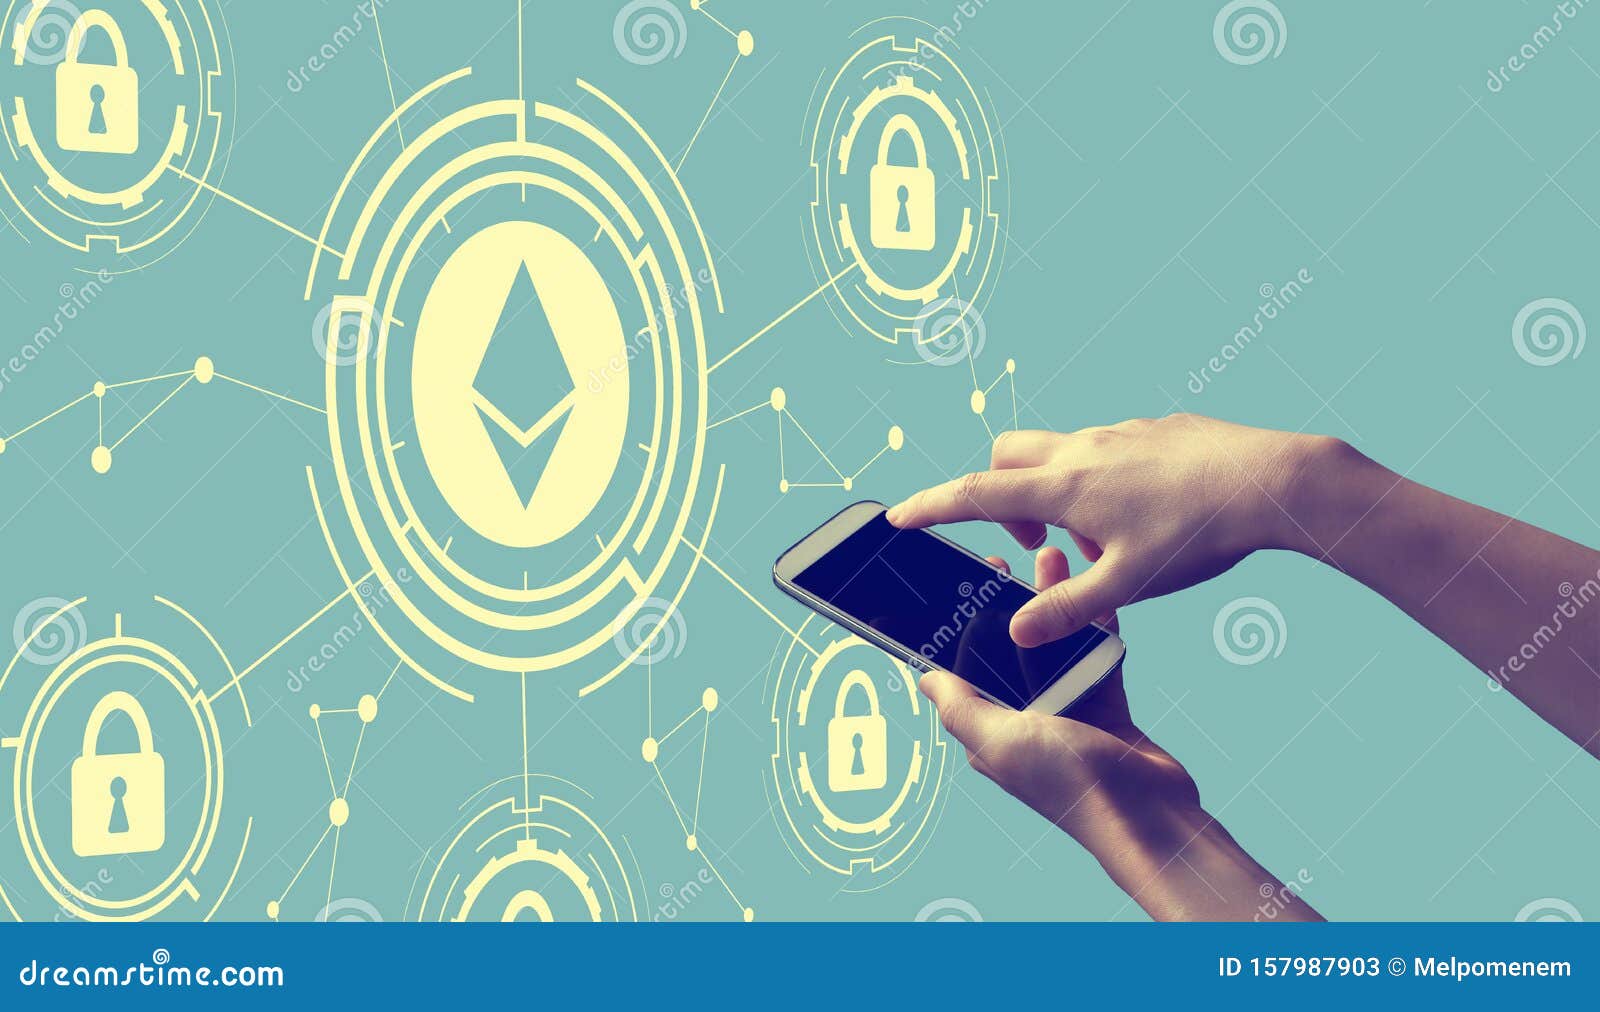 how is ethereum secure